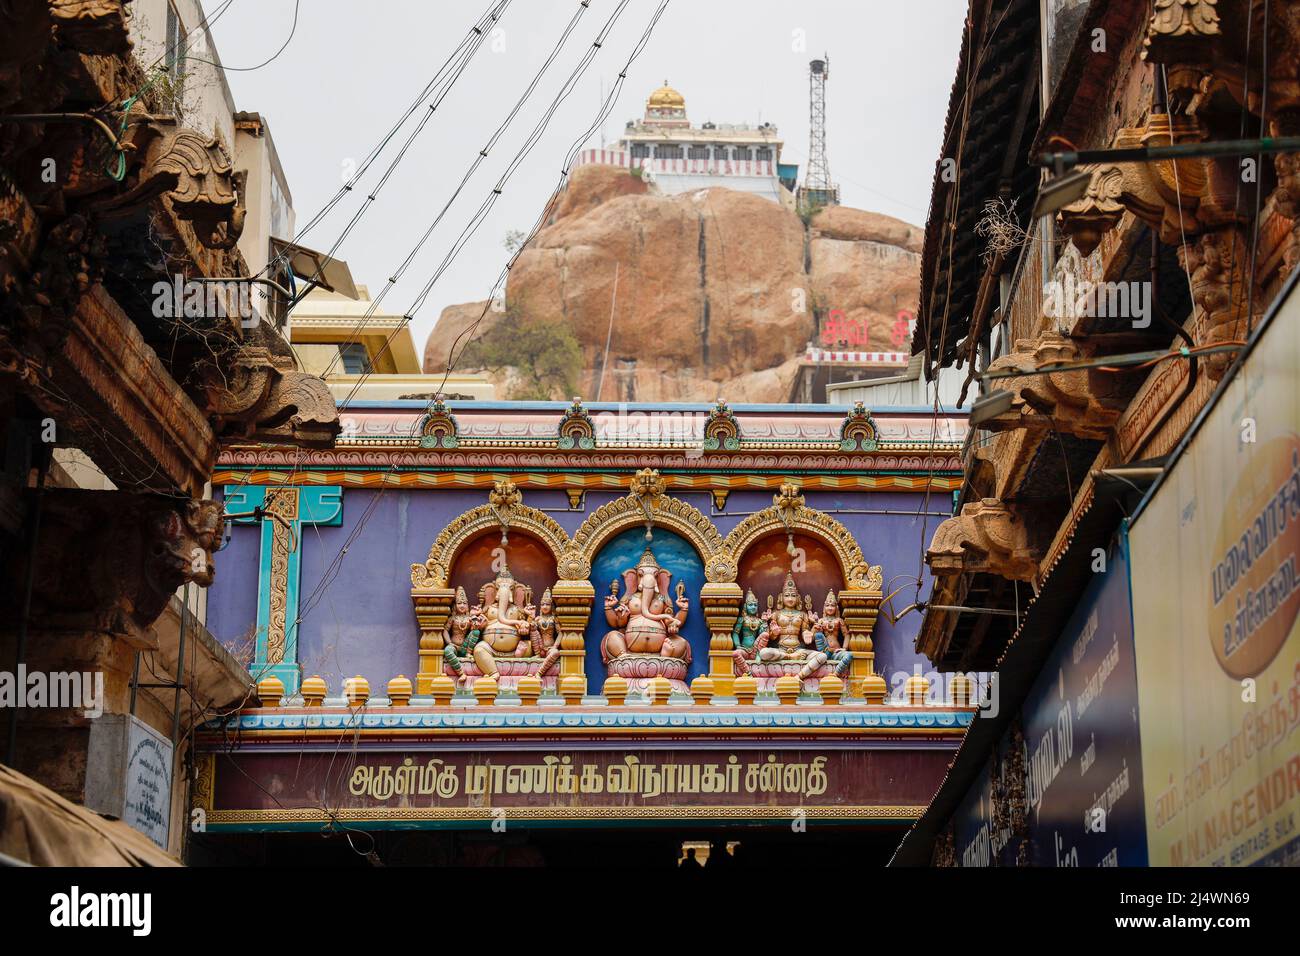 In the foreground  entrance to the Ganesha Temple (Manicka Vinayagar Temple, Malaikottai), in the background the 7th century Rockfort Temple (Arulmigu Stock Photo